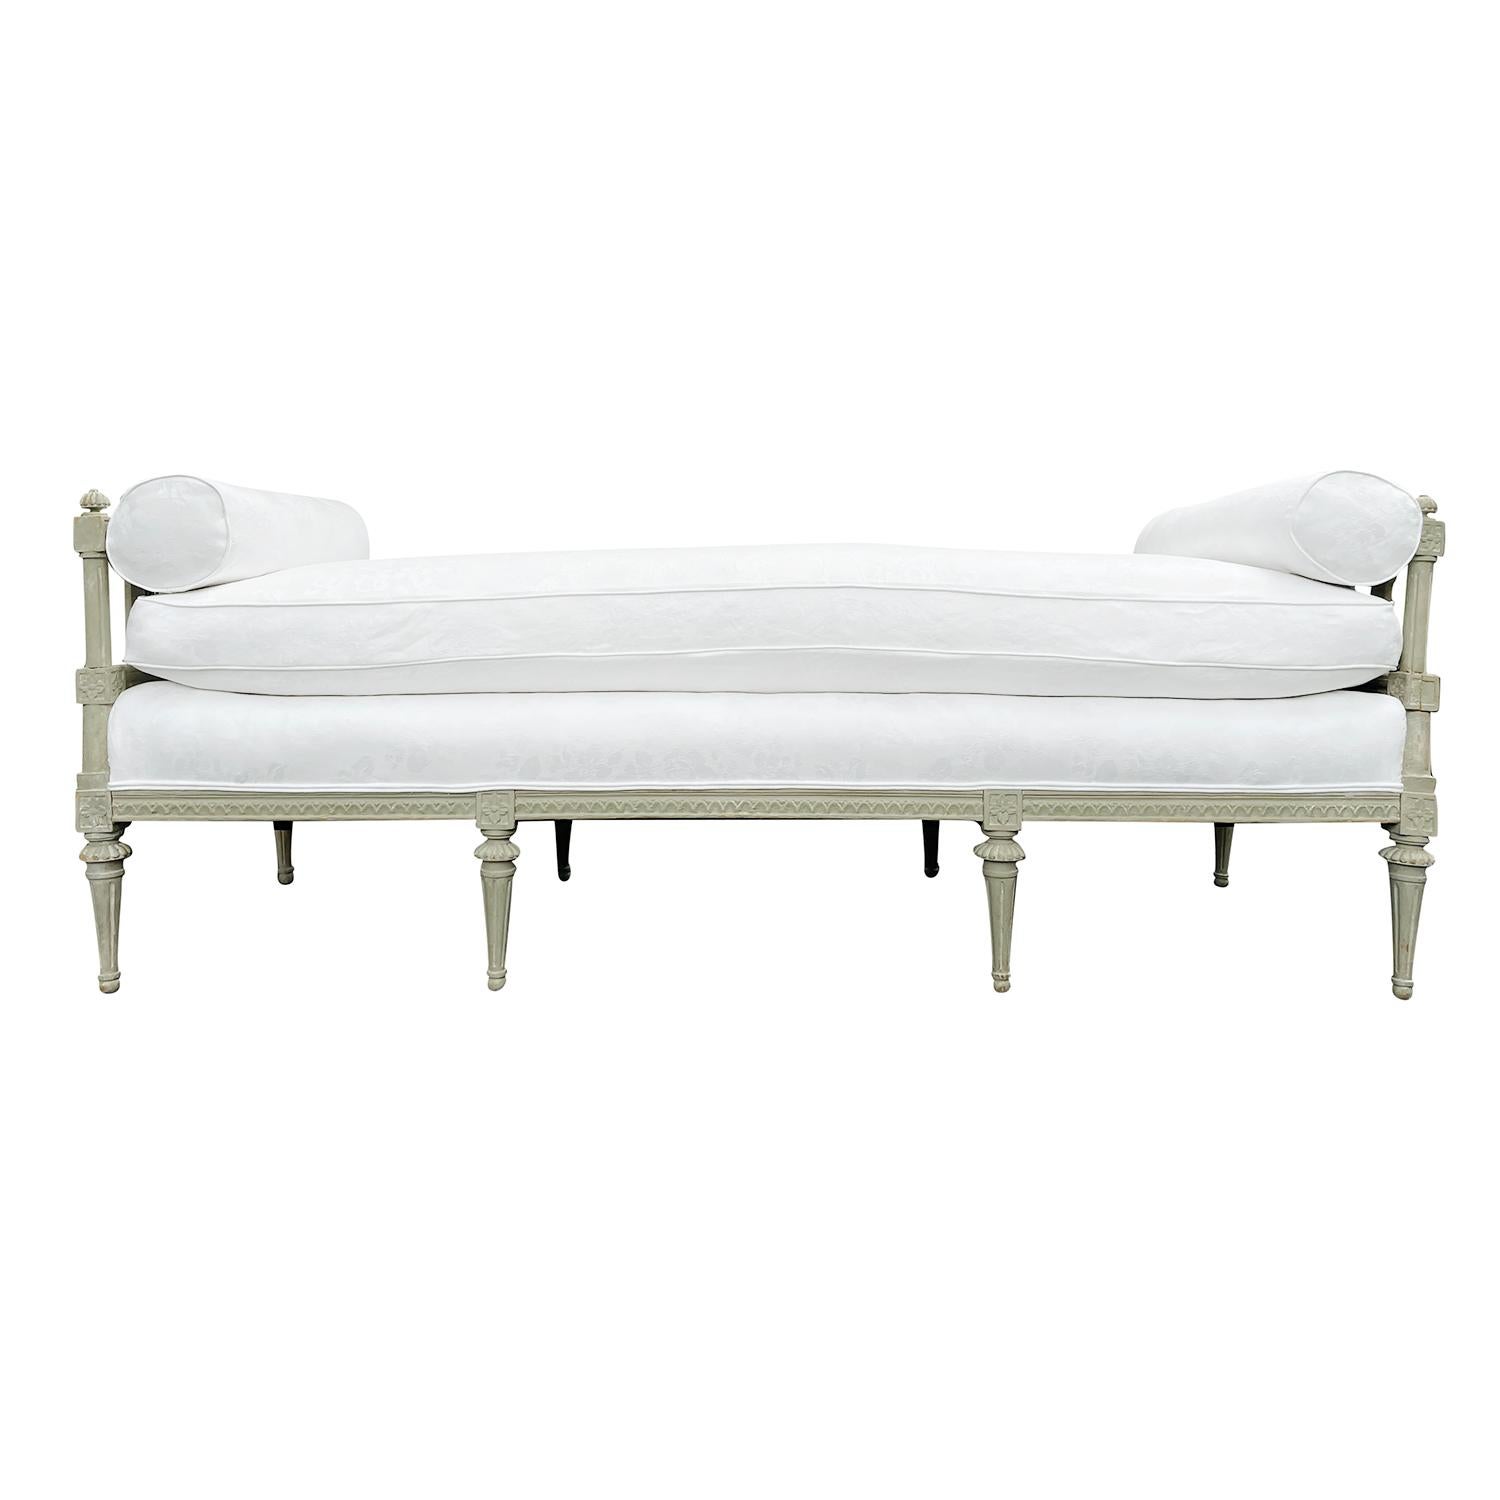 A light-grey, antique Swedish Gustavian daybed made of hand crafted painted Pinewood with two round pillows, in good condition. The sides of the Scandinavian wood sofa are spindled, supported by eight, small round tapered fluted feet, enhanced by